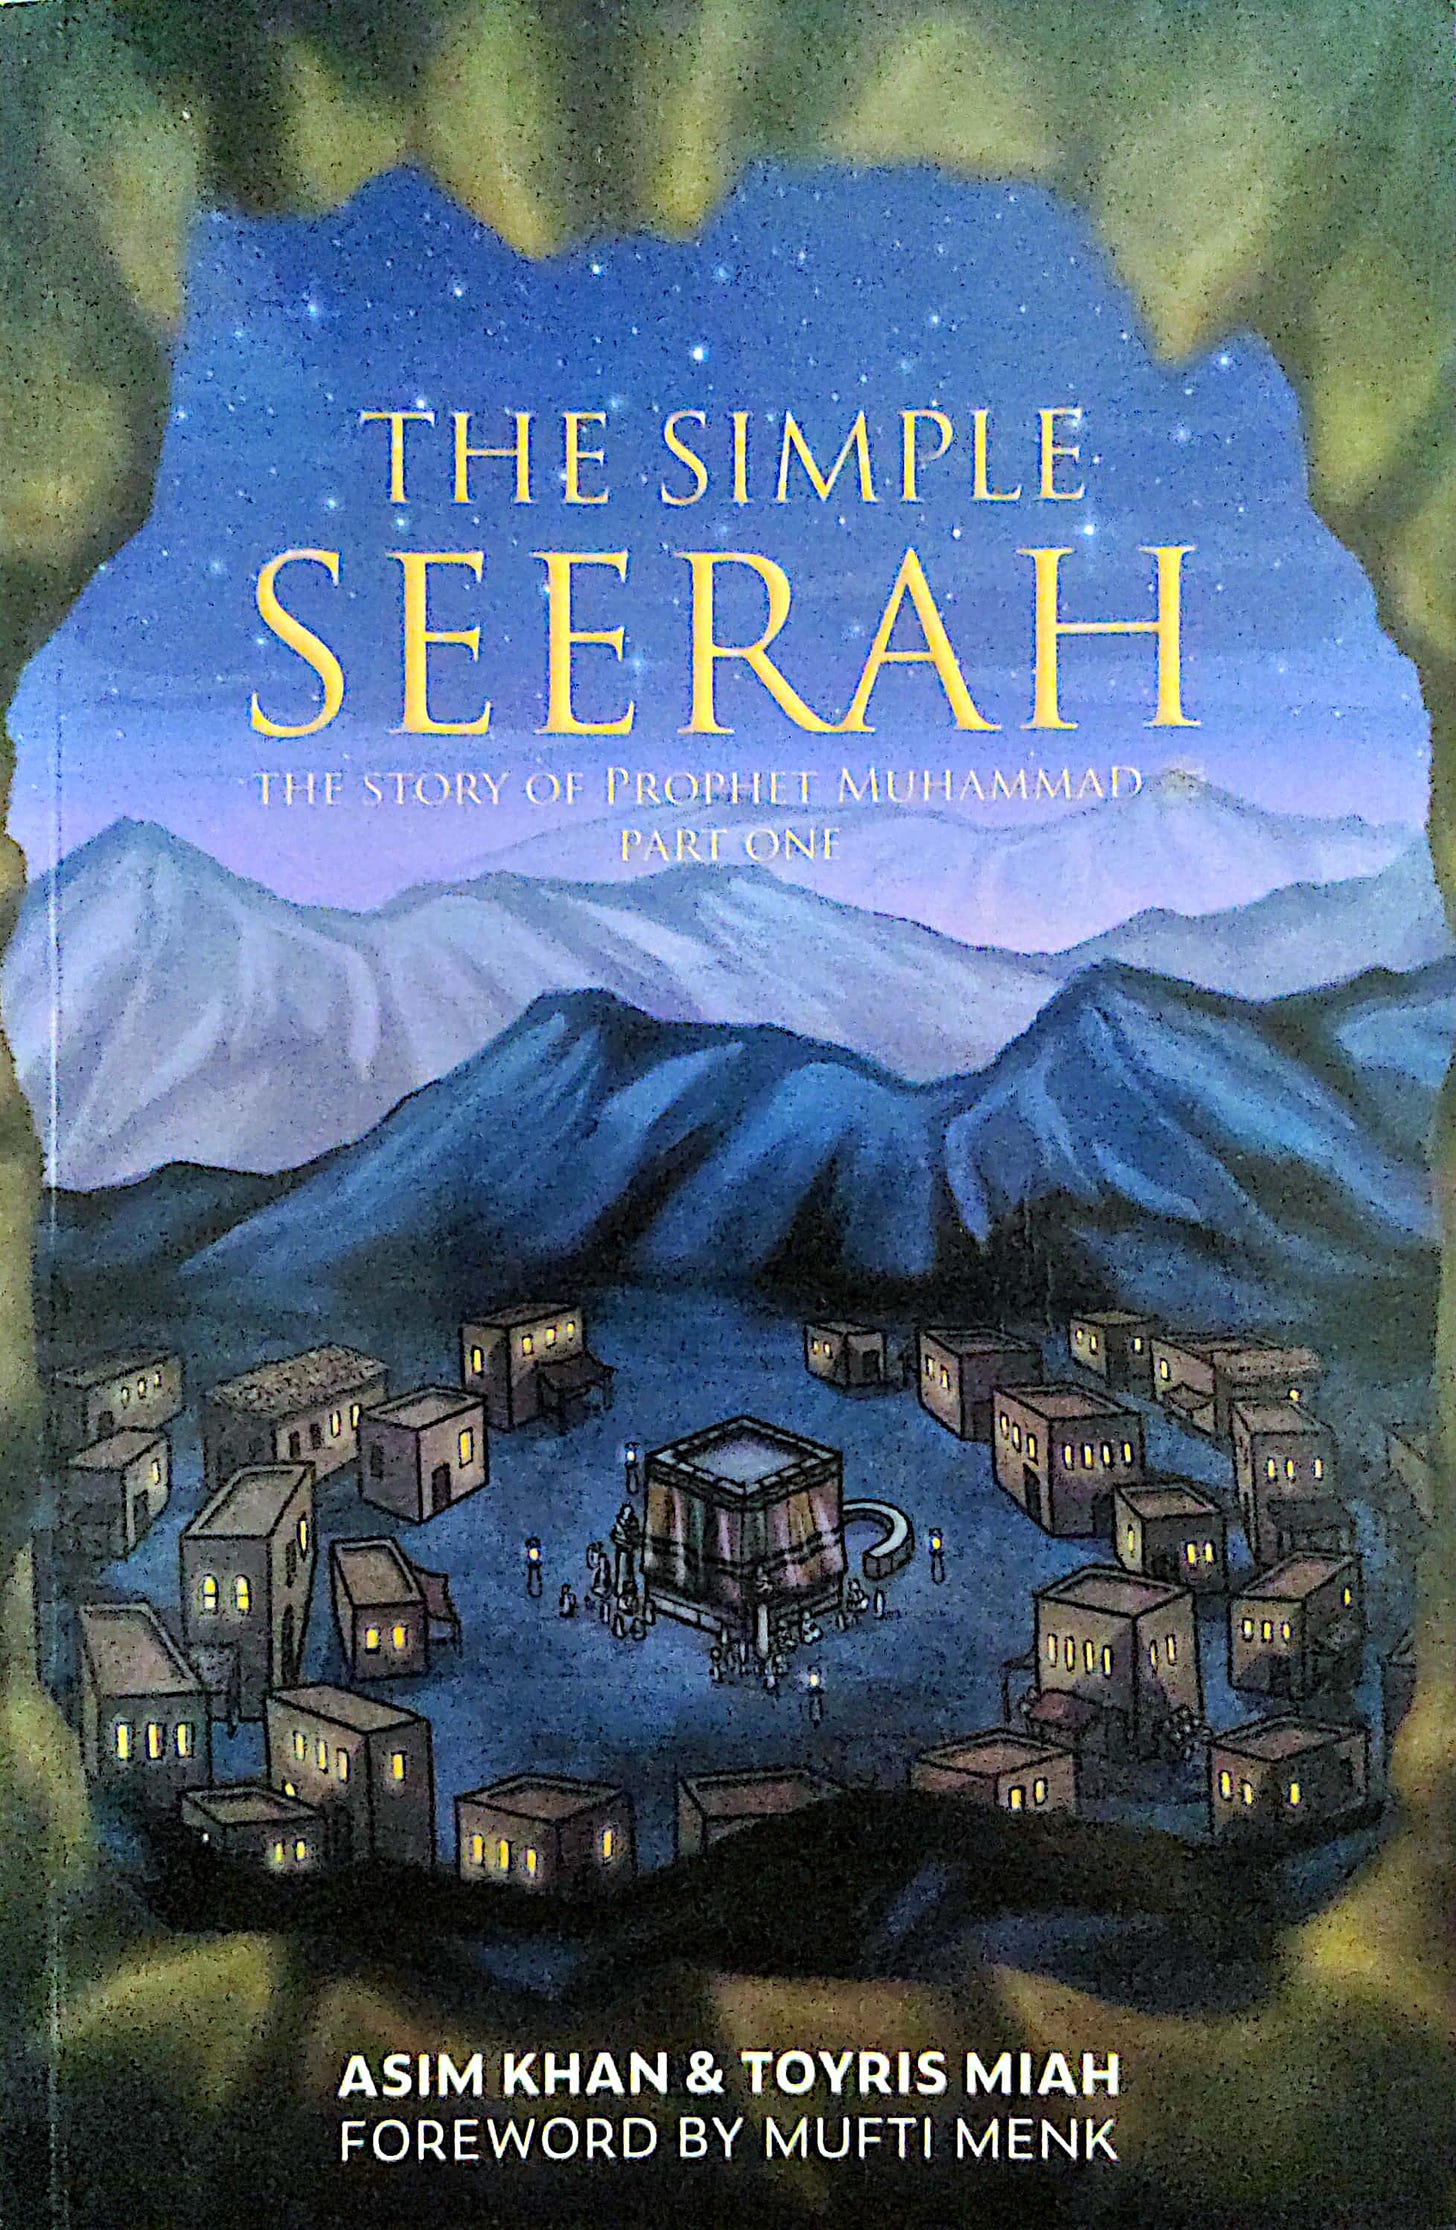 The Simple Seerah: The Story of The Prophet Muhammad Part One by Ustadh  Asim Khan | Goodreads